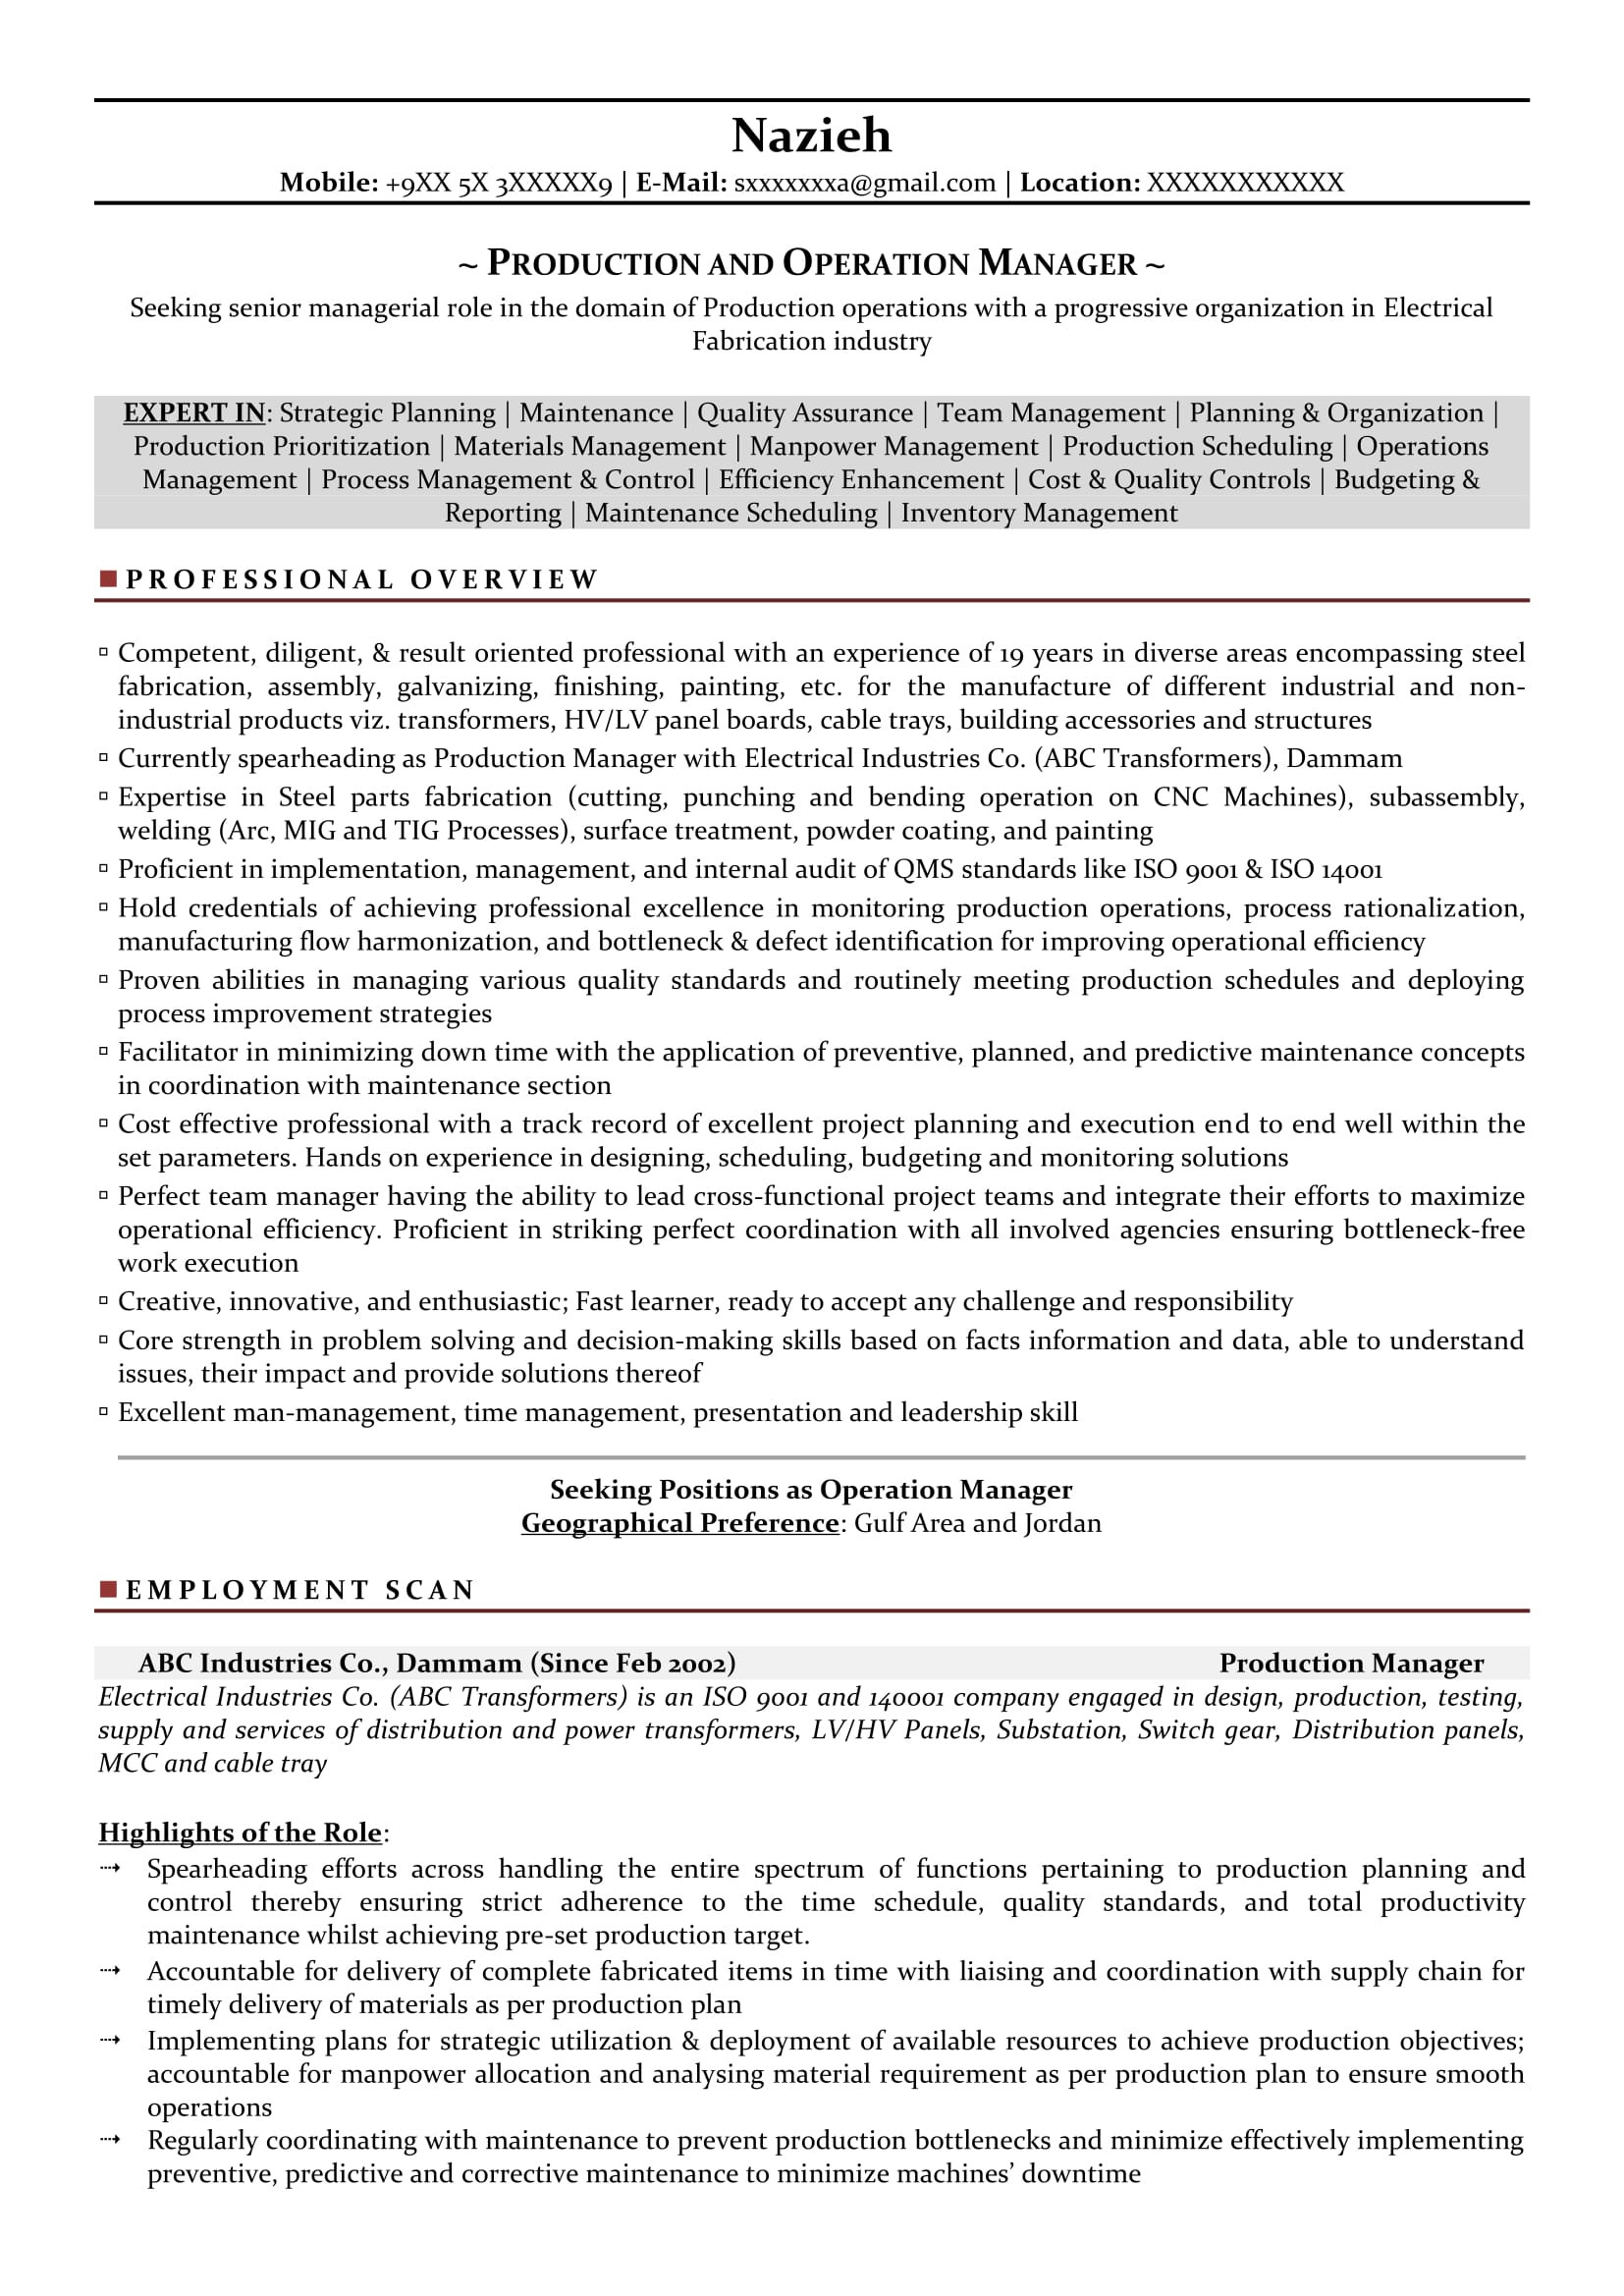 Sample Resume for Production Planning Manager Production Manager Sample Resumes, Download Resume format Templates!